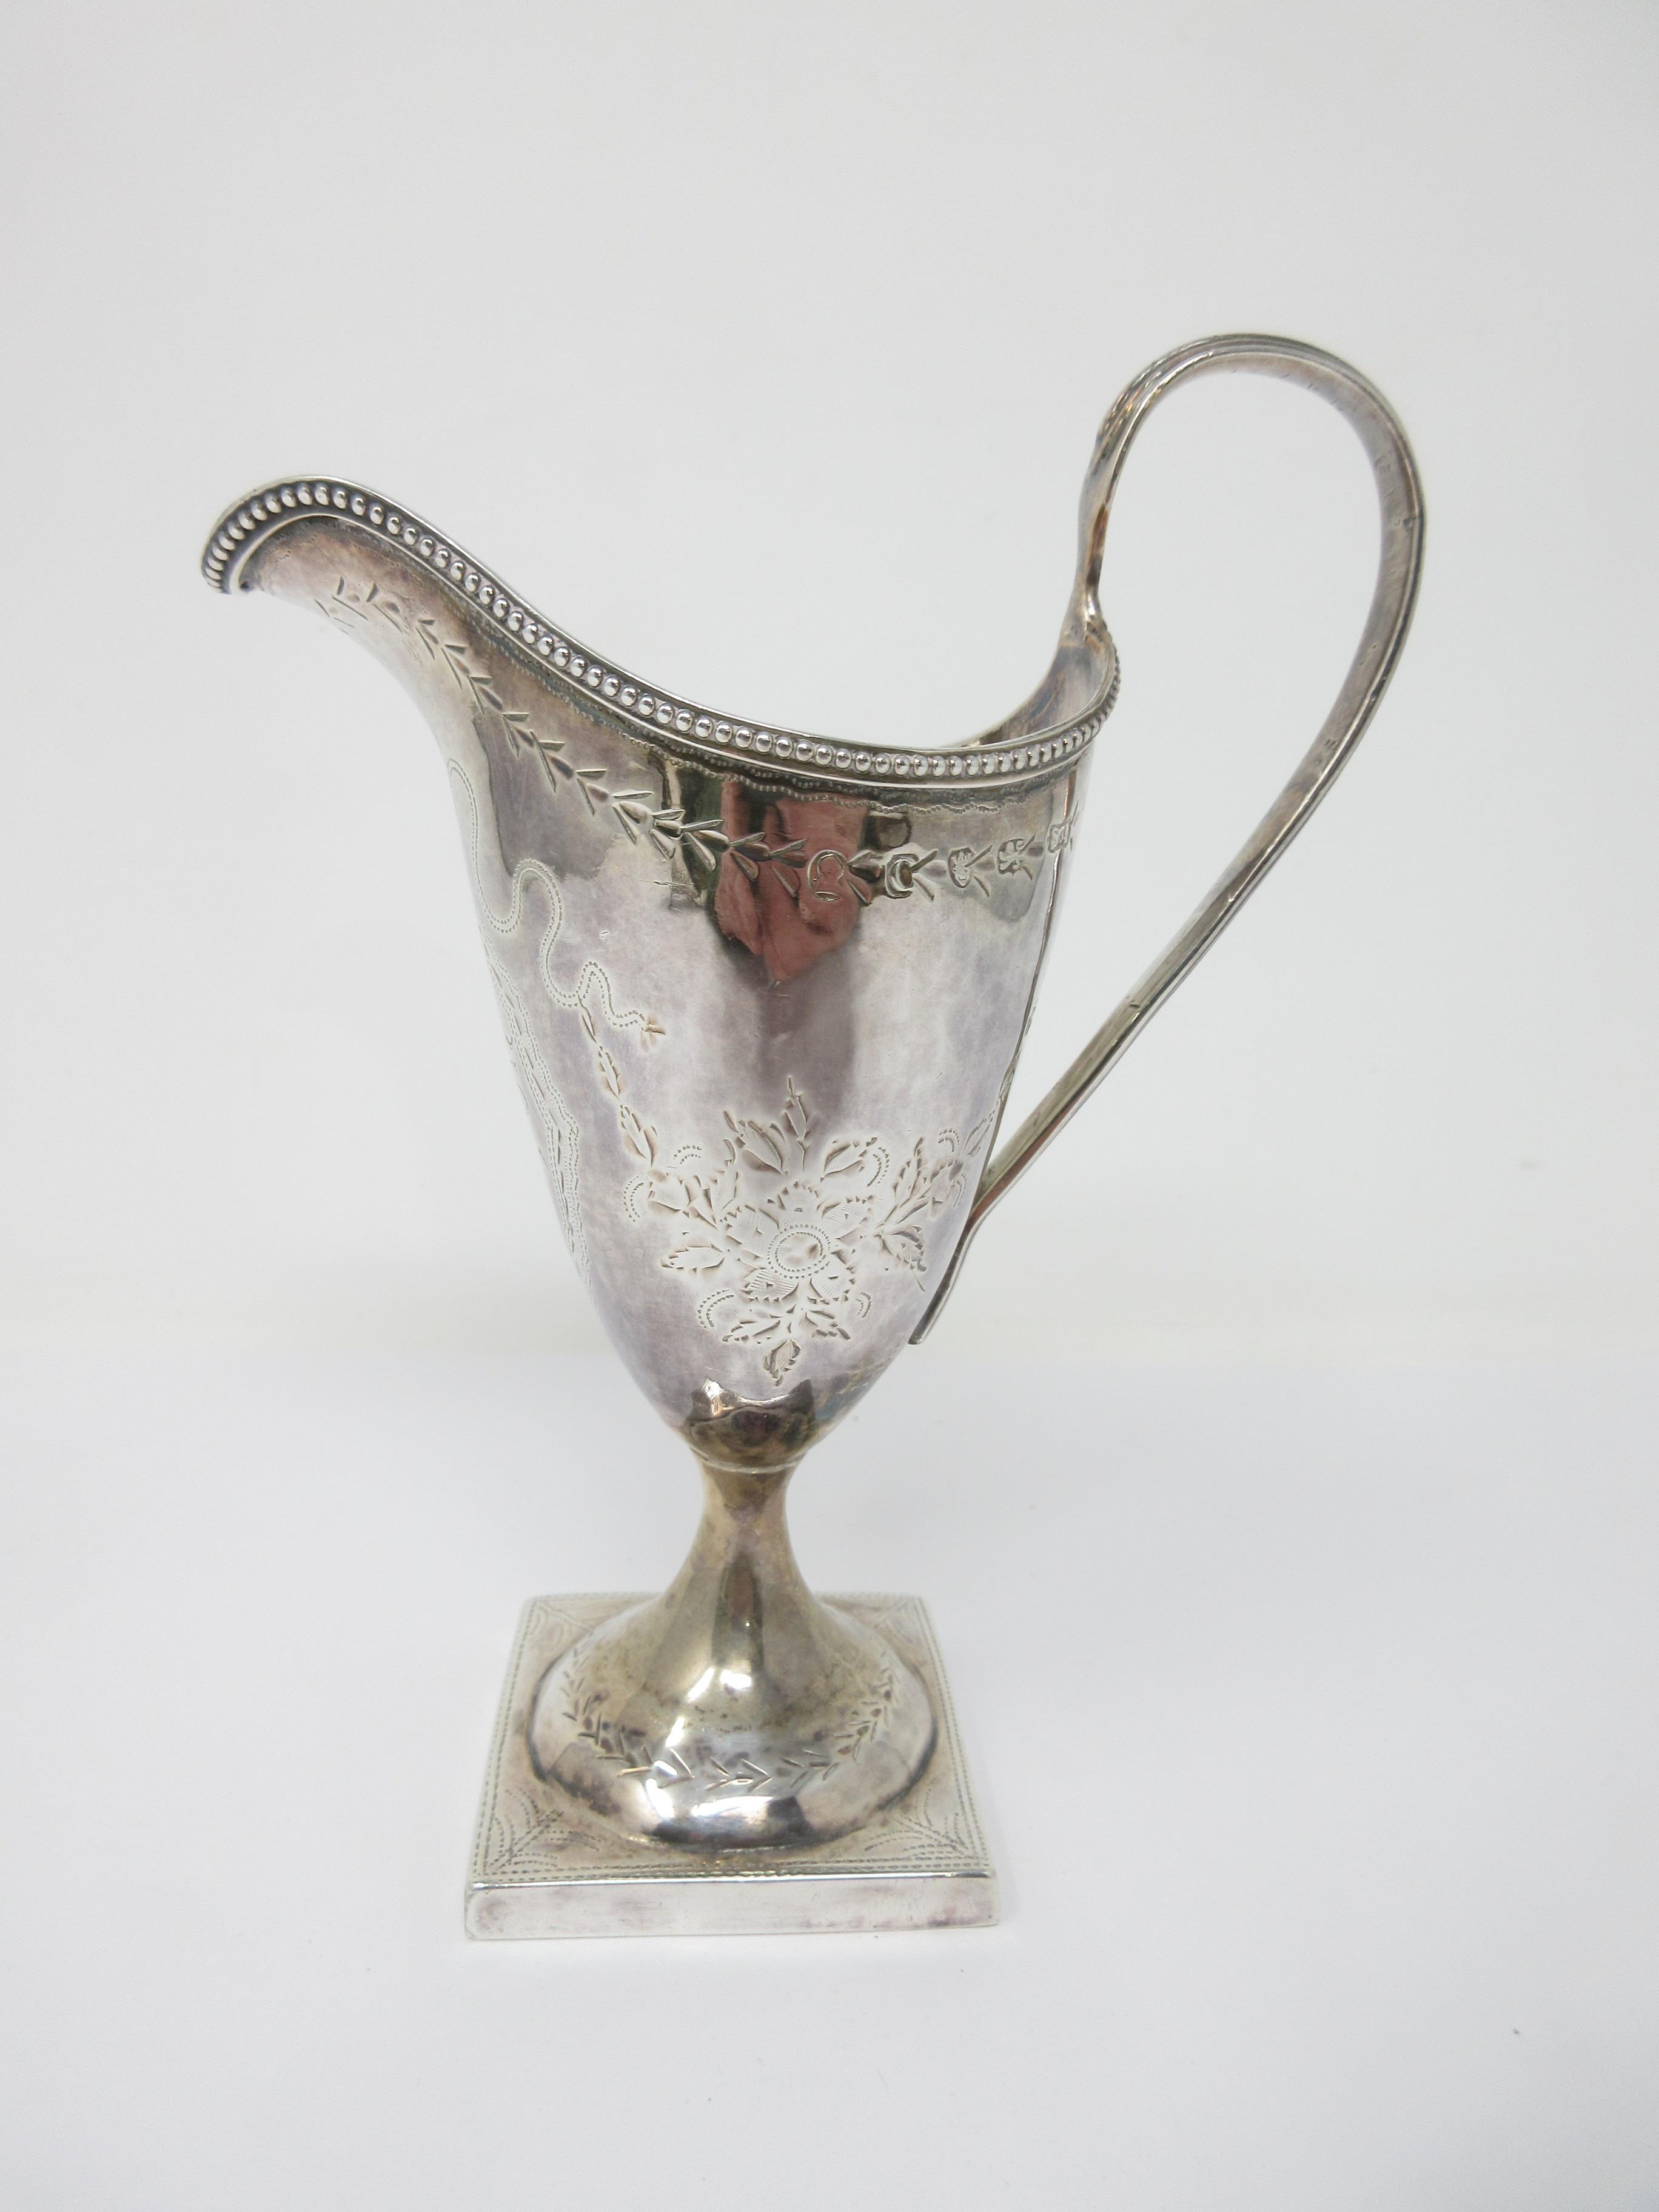 A George III silver helmet shape Cream Jug engraved floral swags, initials in cartouche, beaded